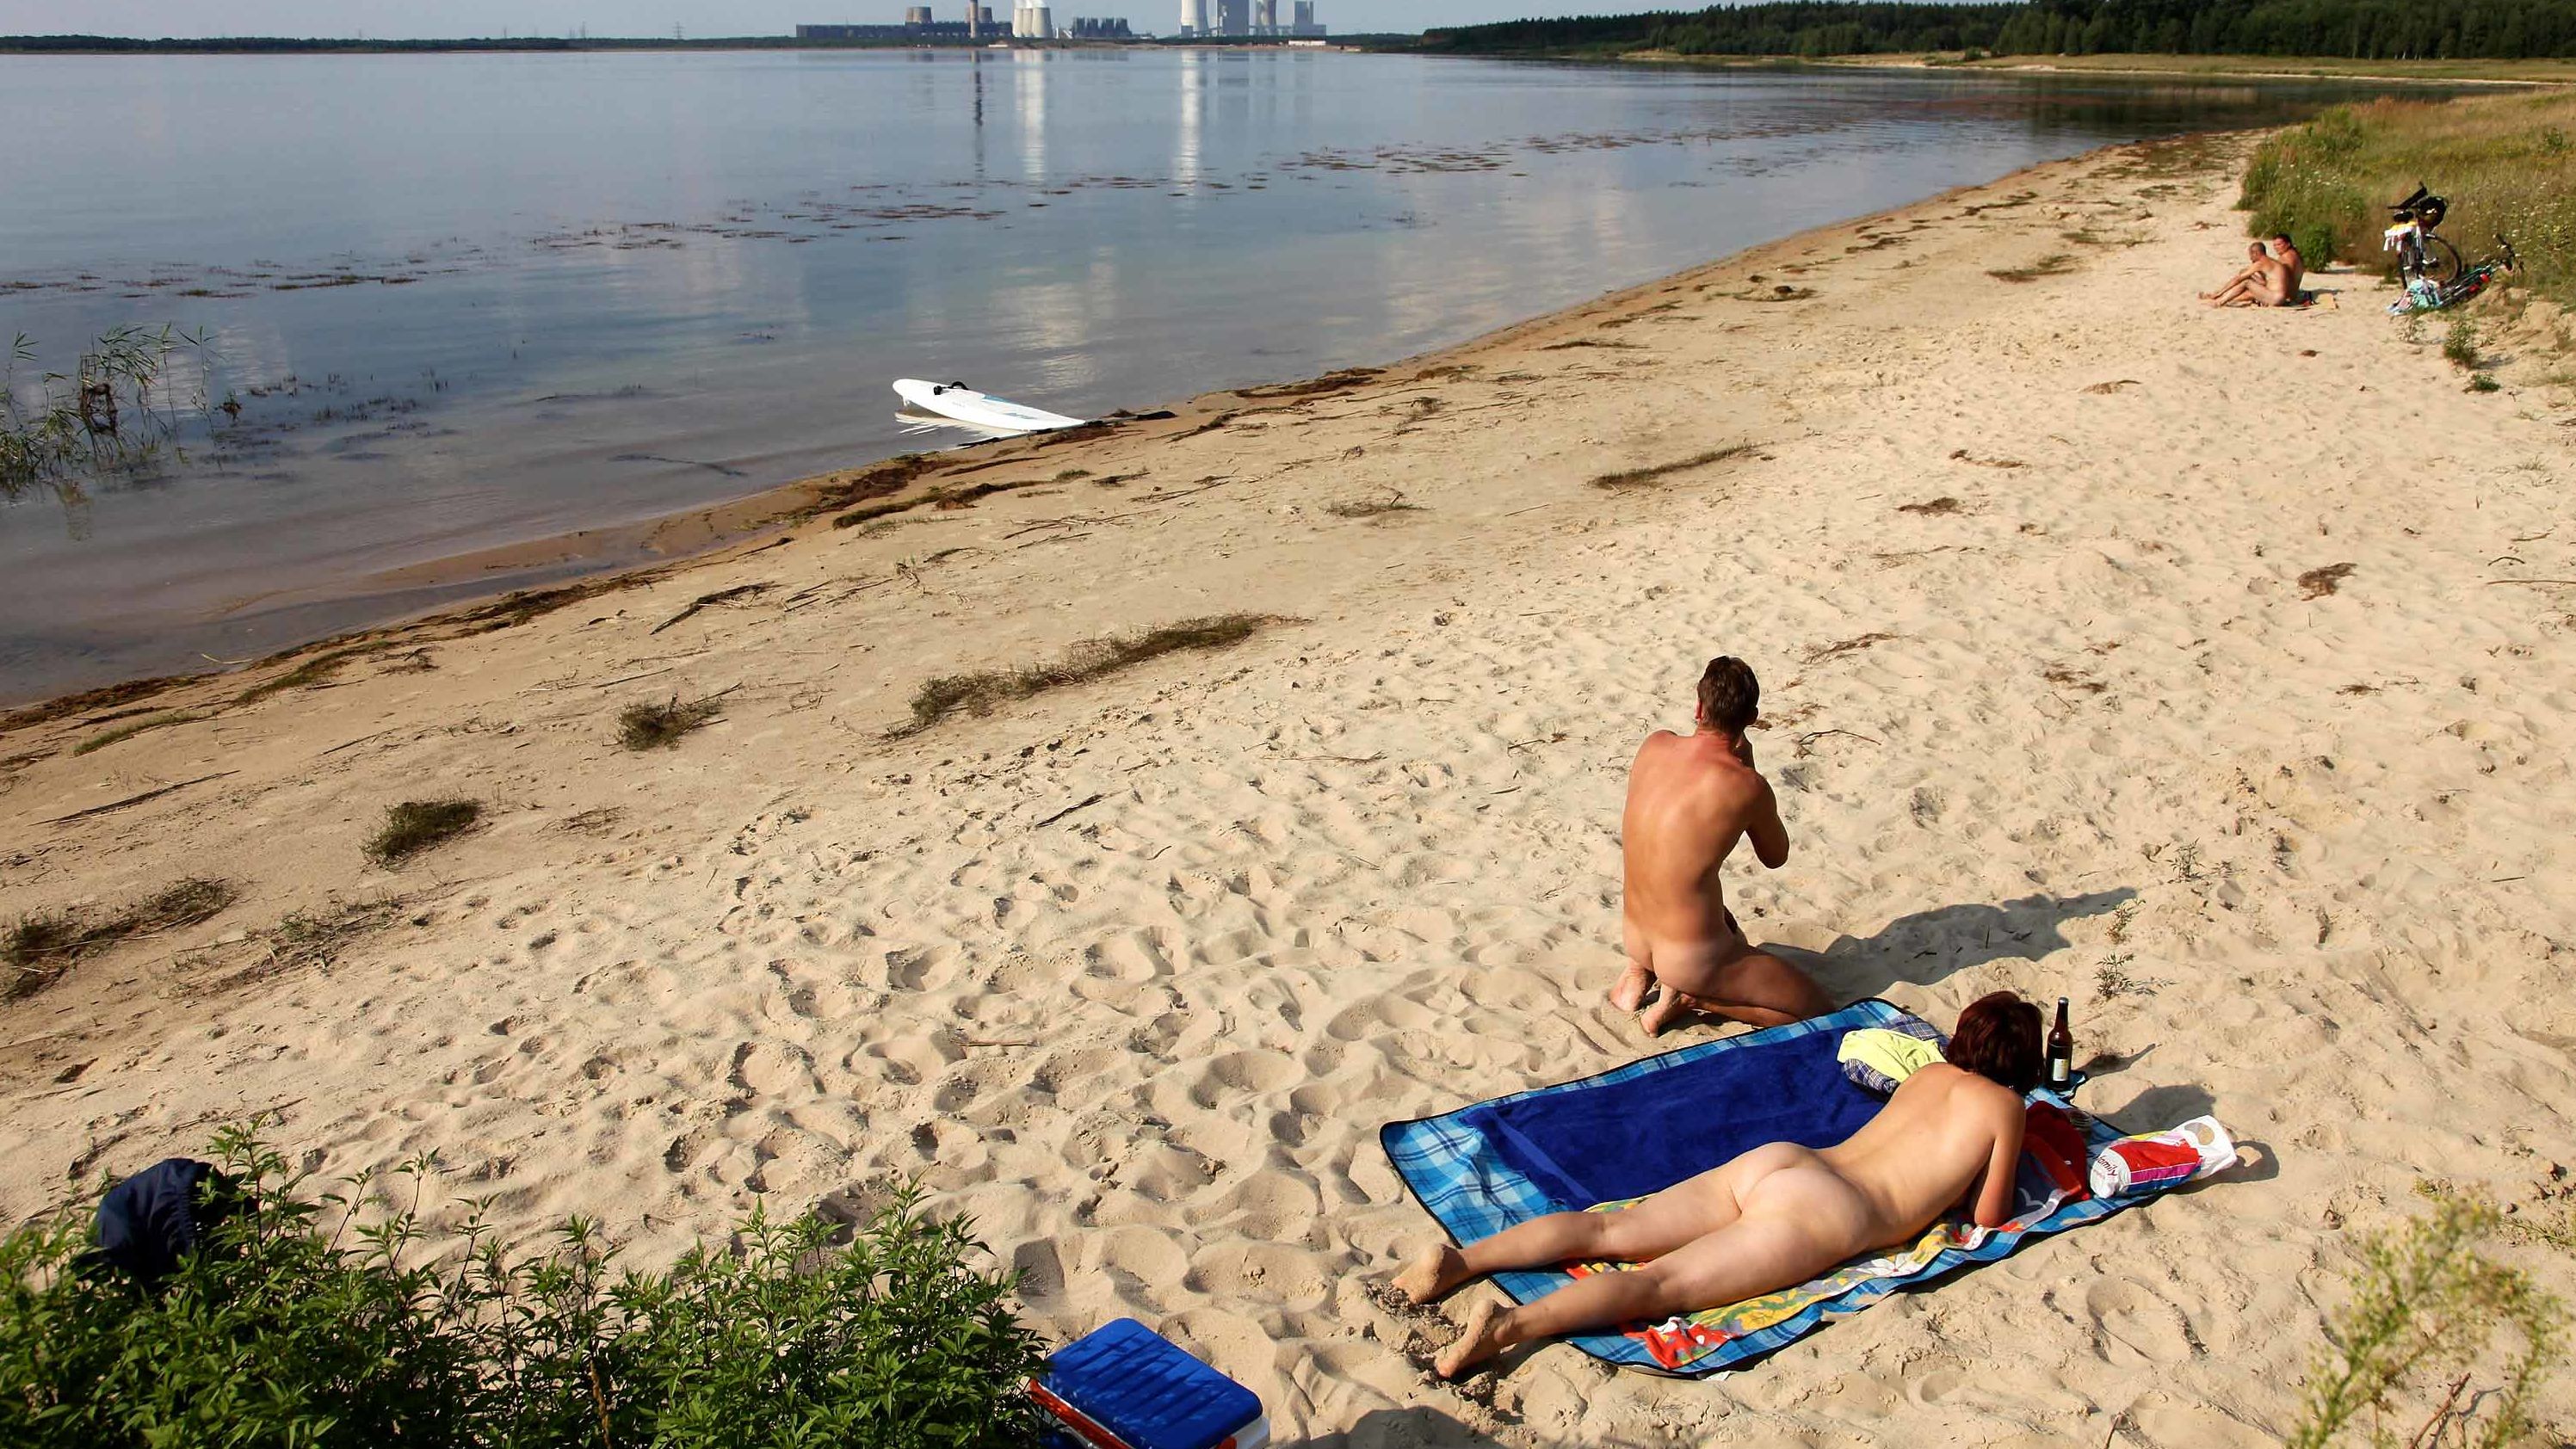 Vintage Naturist Beach Videos - Nudity in Germany: The naked truth is revealed | CNN